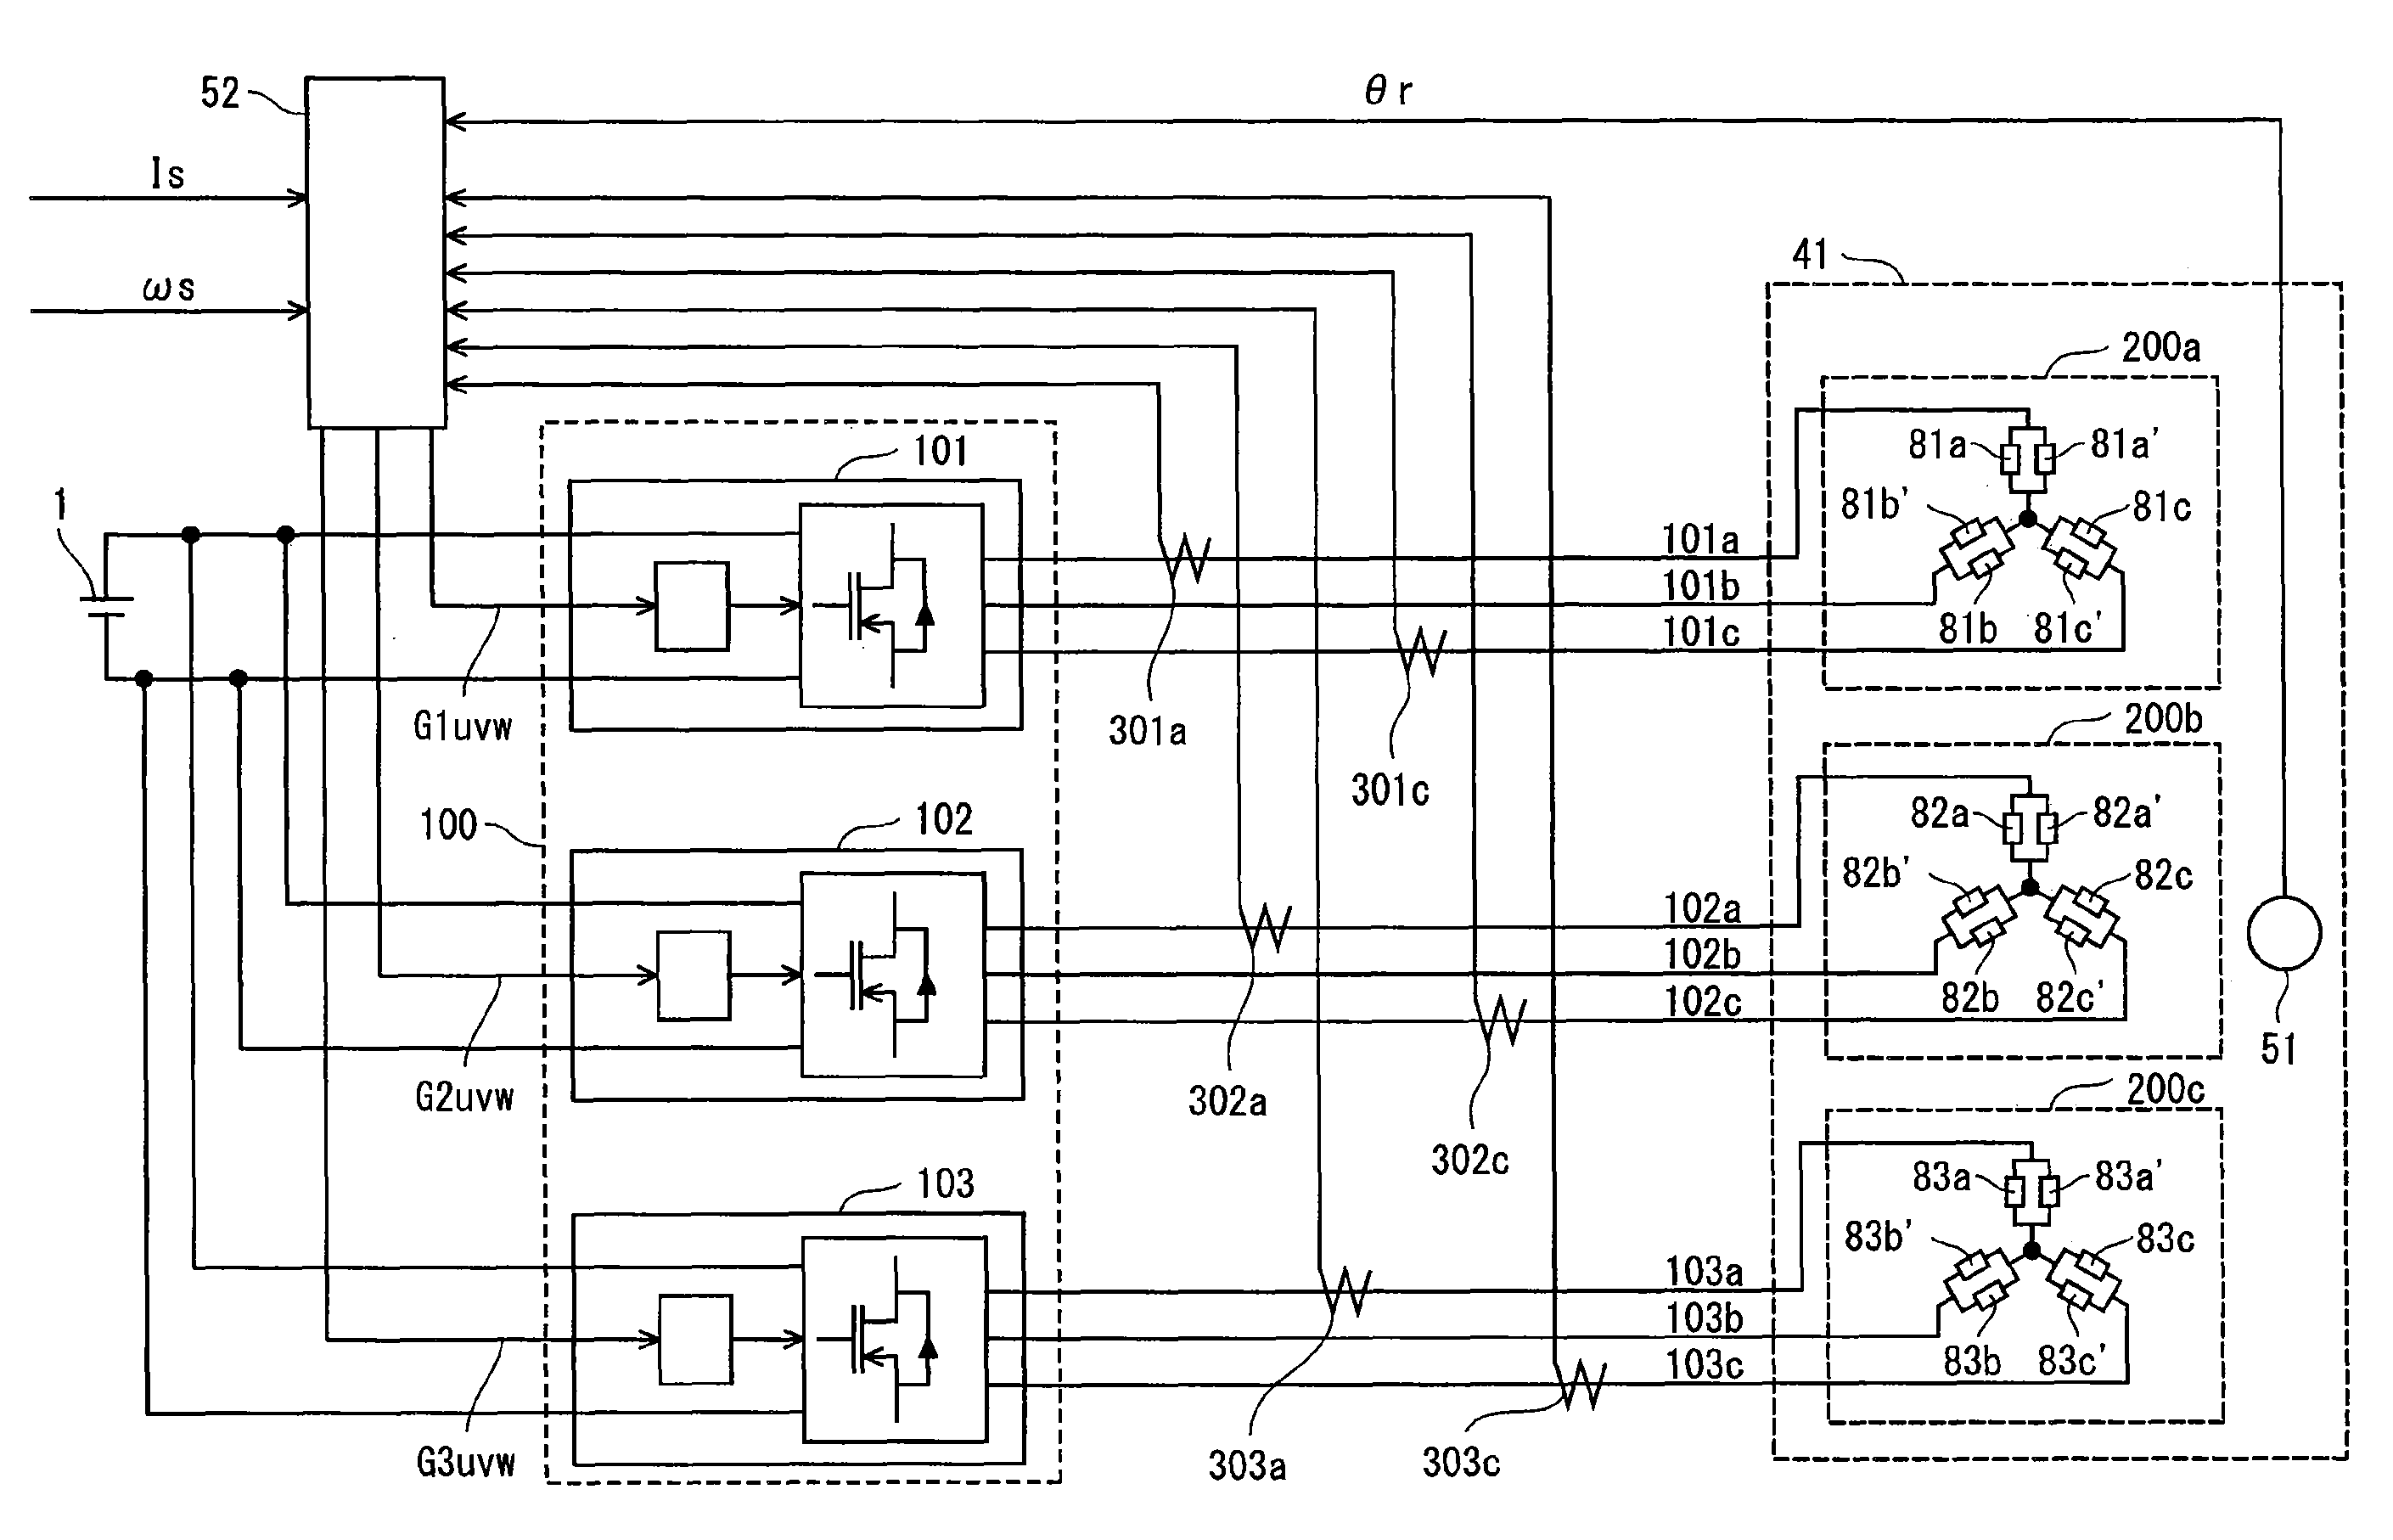 Synchronous electric motor drive system